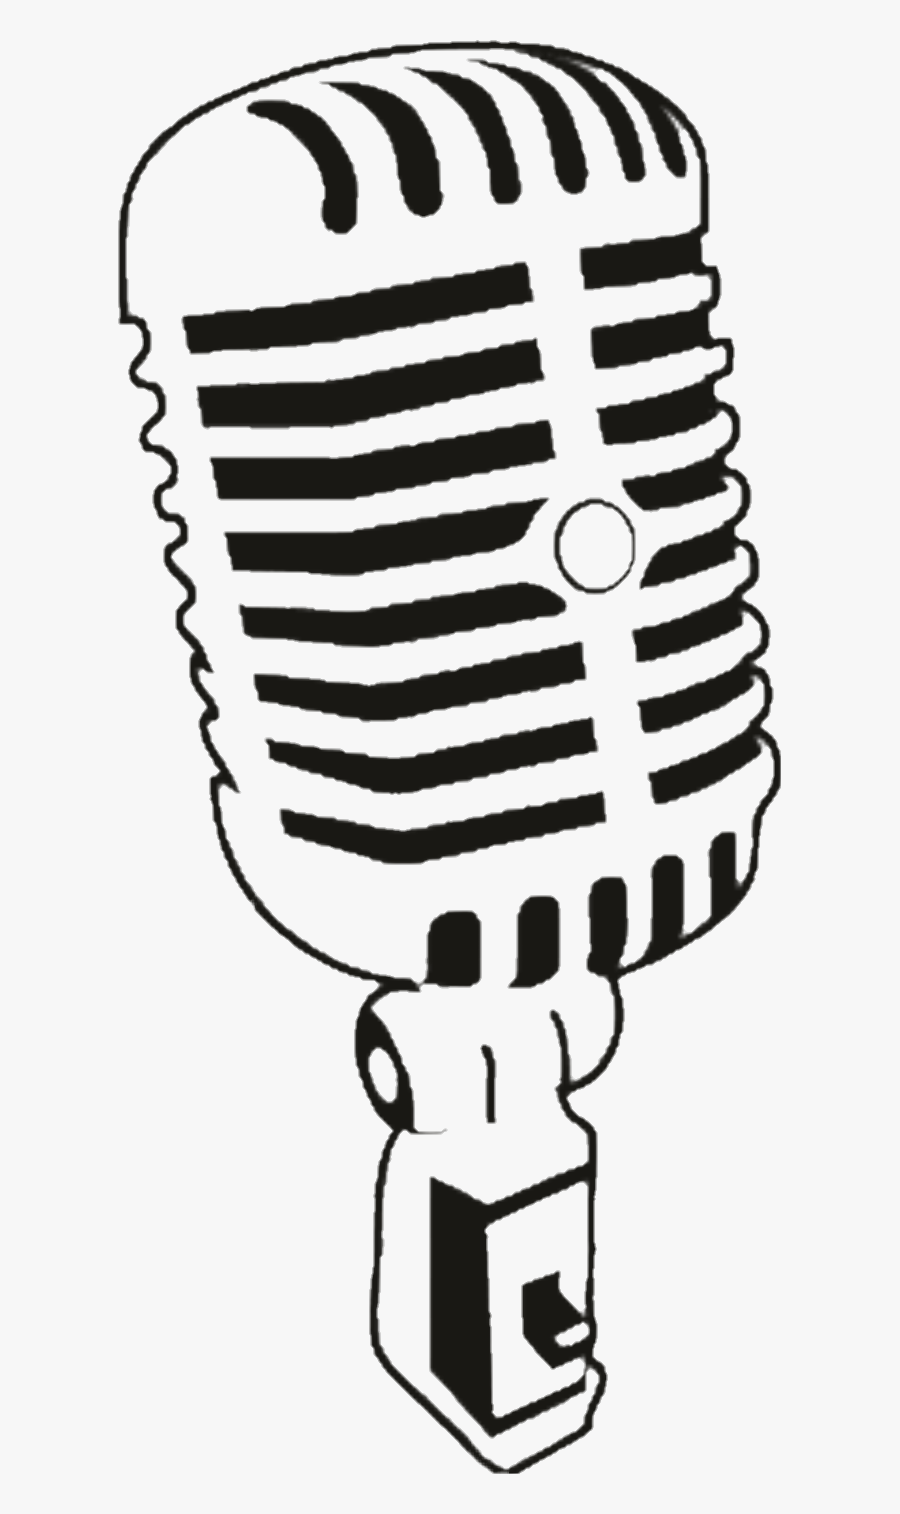 #microphone #rock #microfono - Microphone Vector Png, Transparent Clipart